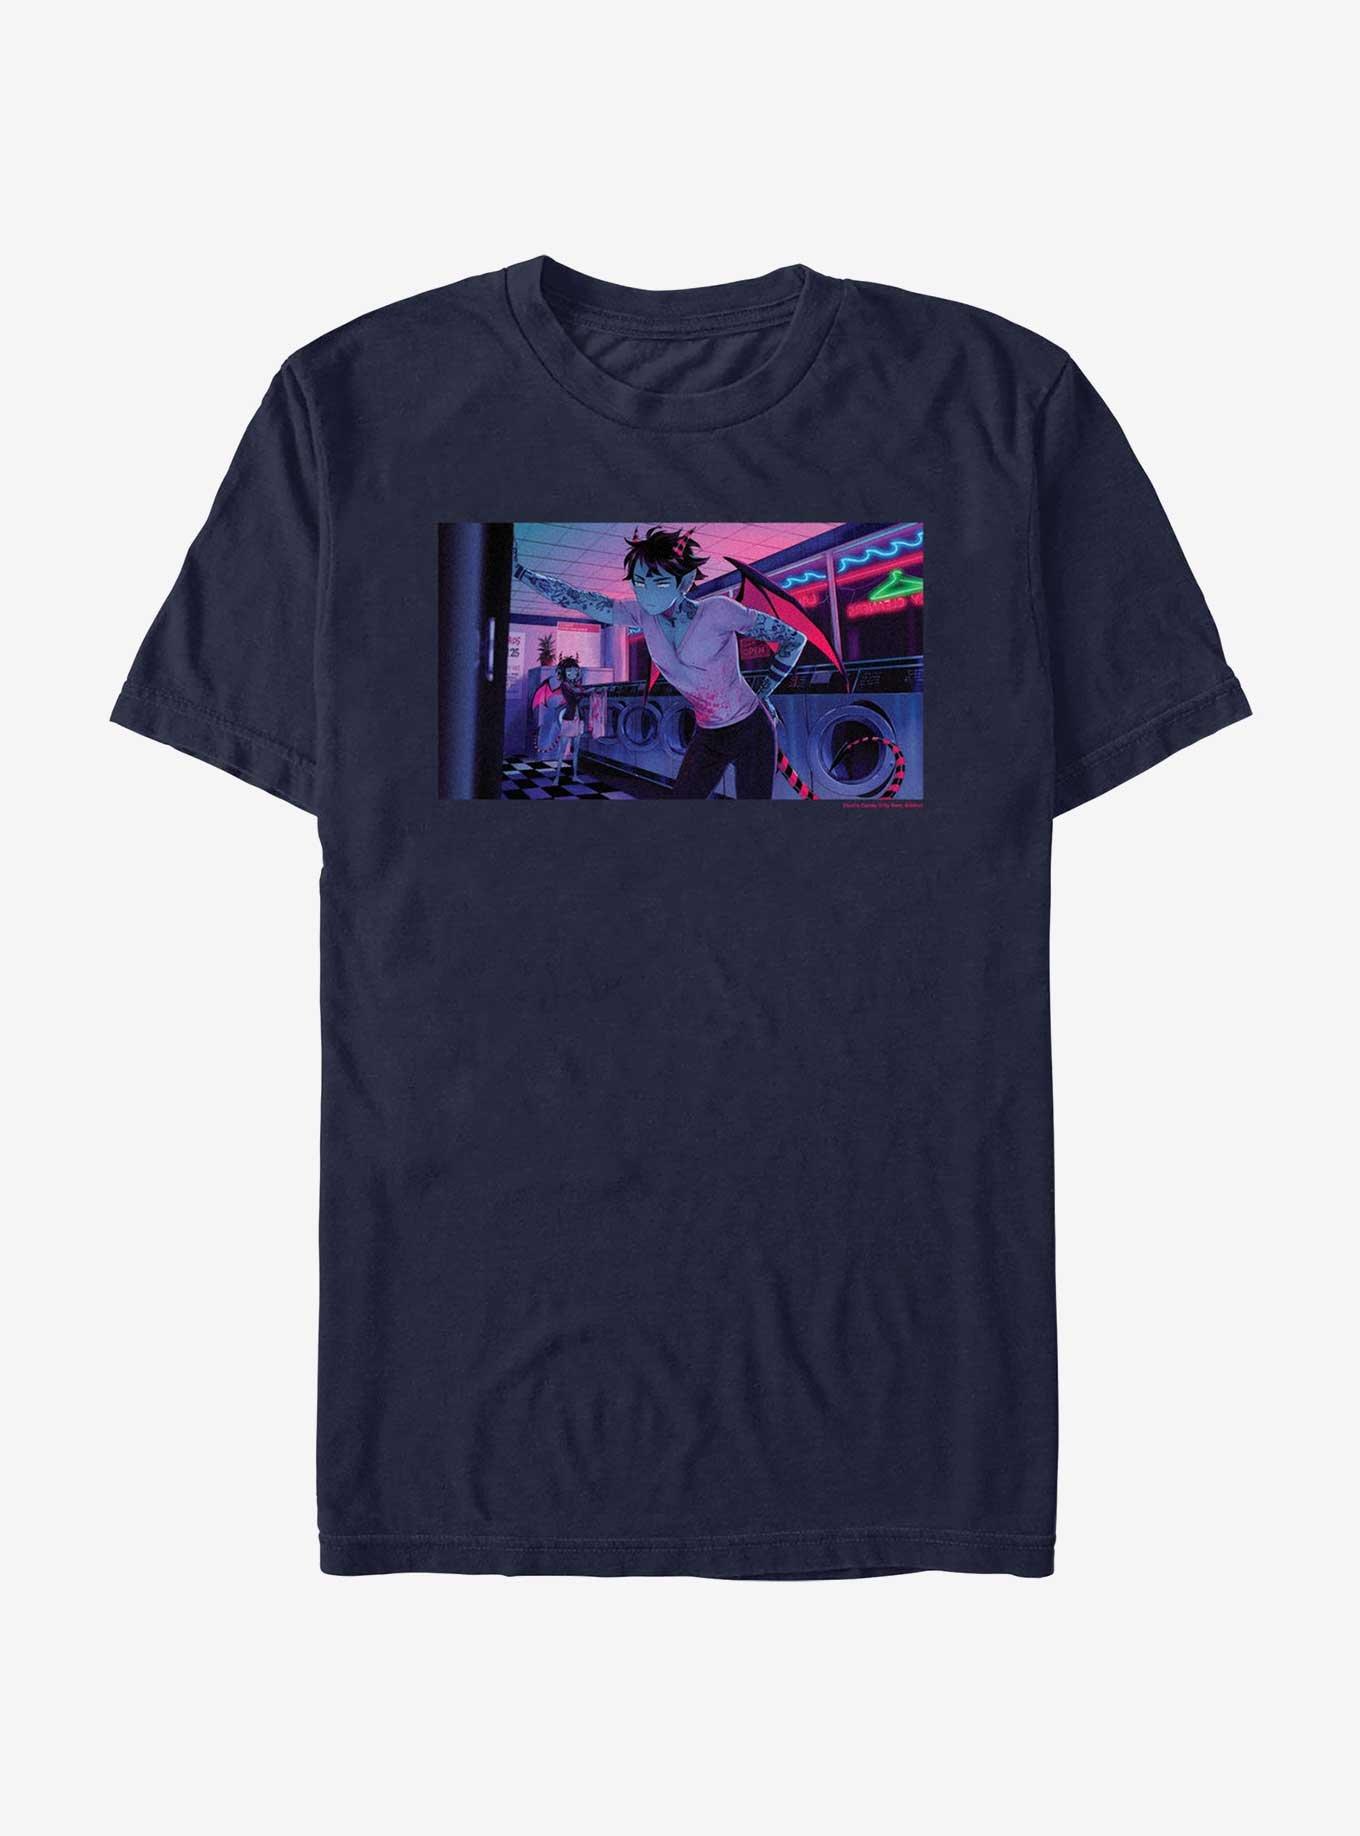 Devil's Candy Laundry Day Wallpaper T-Shirt, NAVY, hi-res